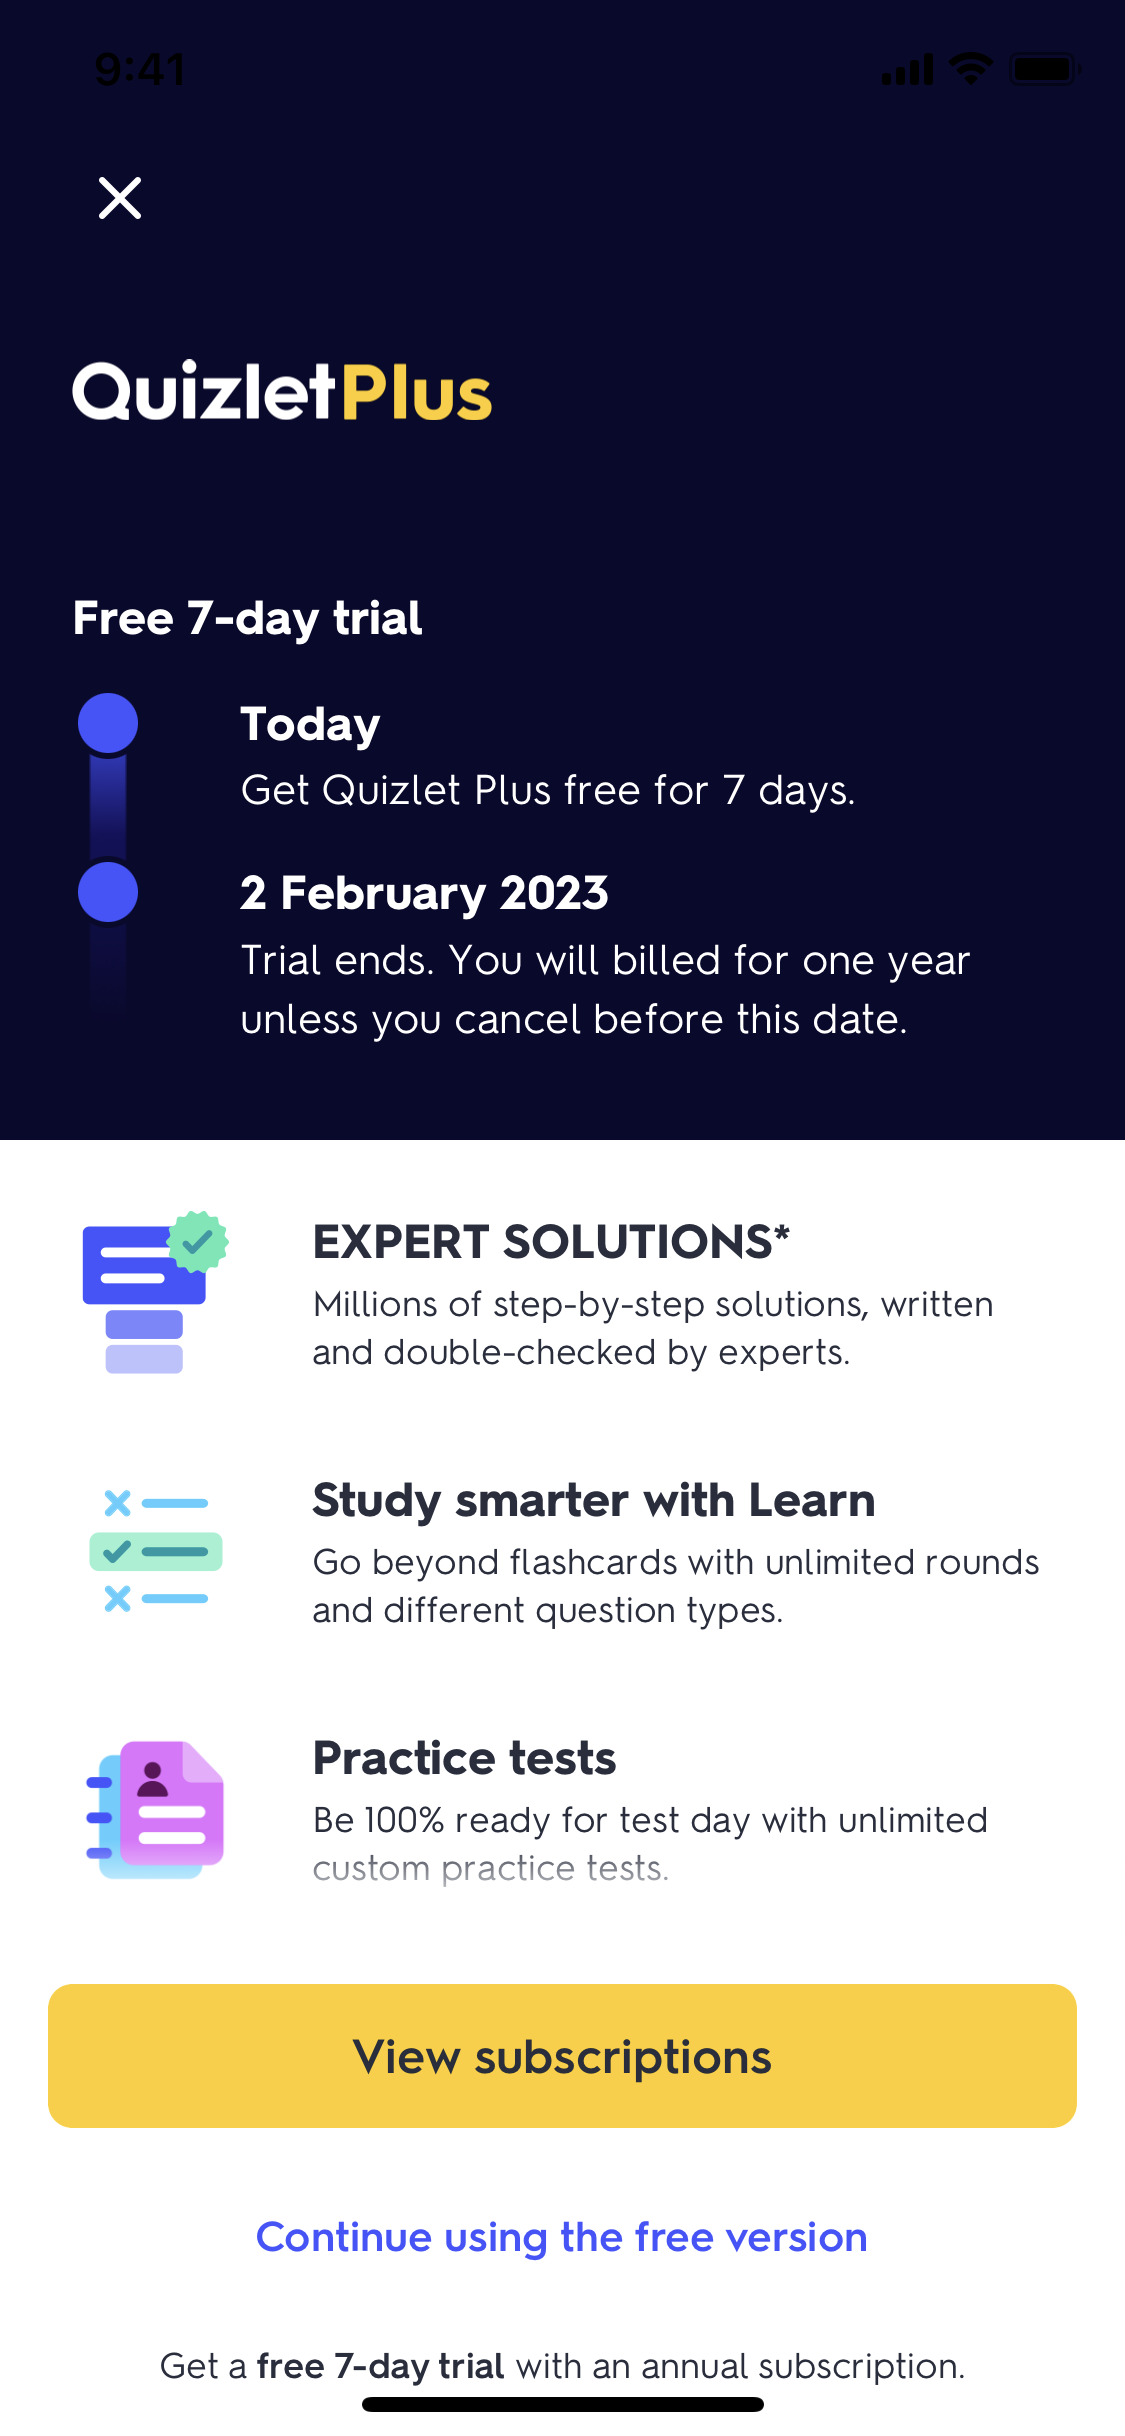 How to SignUp for Quizlet Plus free Trial?